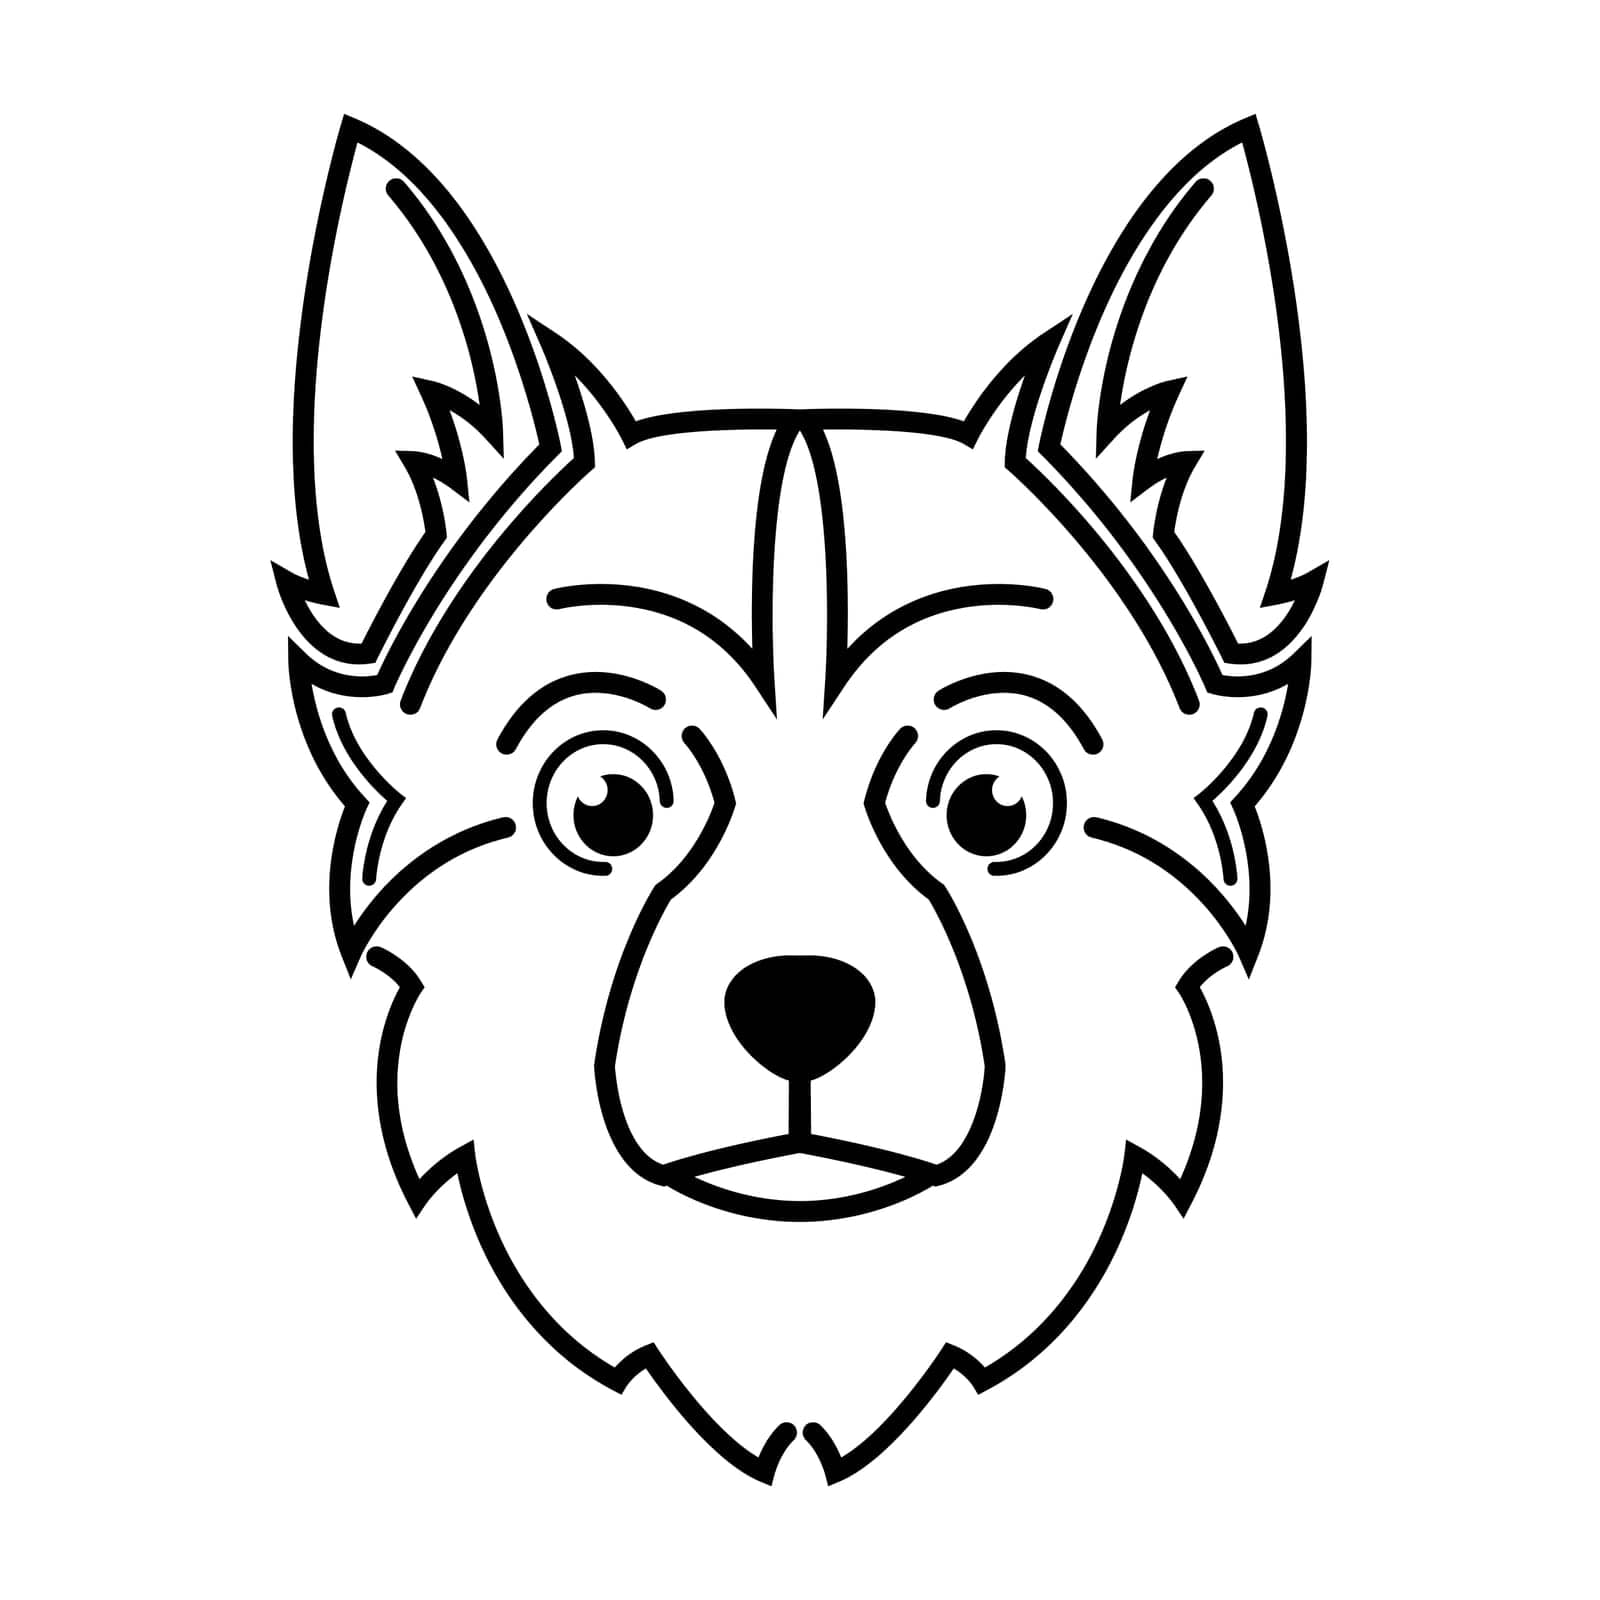 Black and white line art of dog head. Good use for symbol, mascot, icon, avatar, tattoo, T Shirt design, logo or any design by Dear_s_Gallery